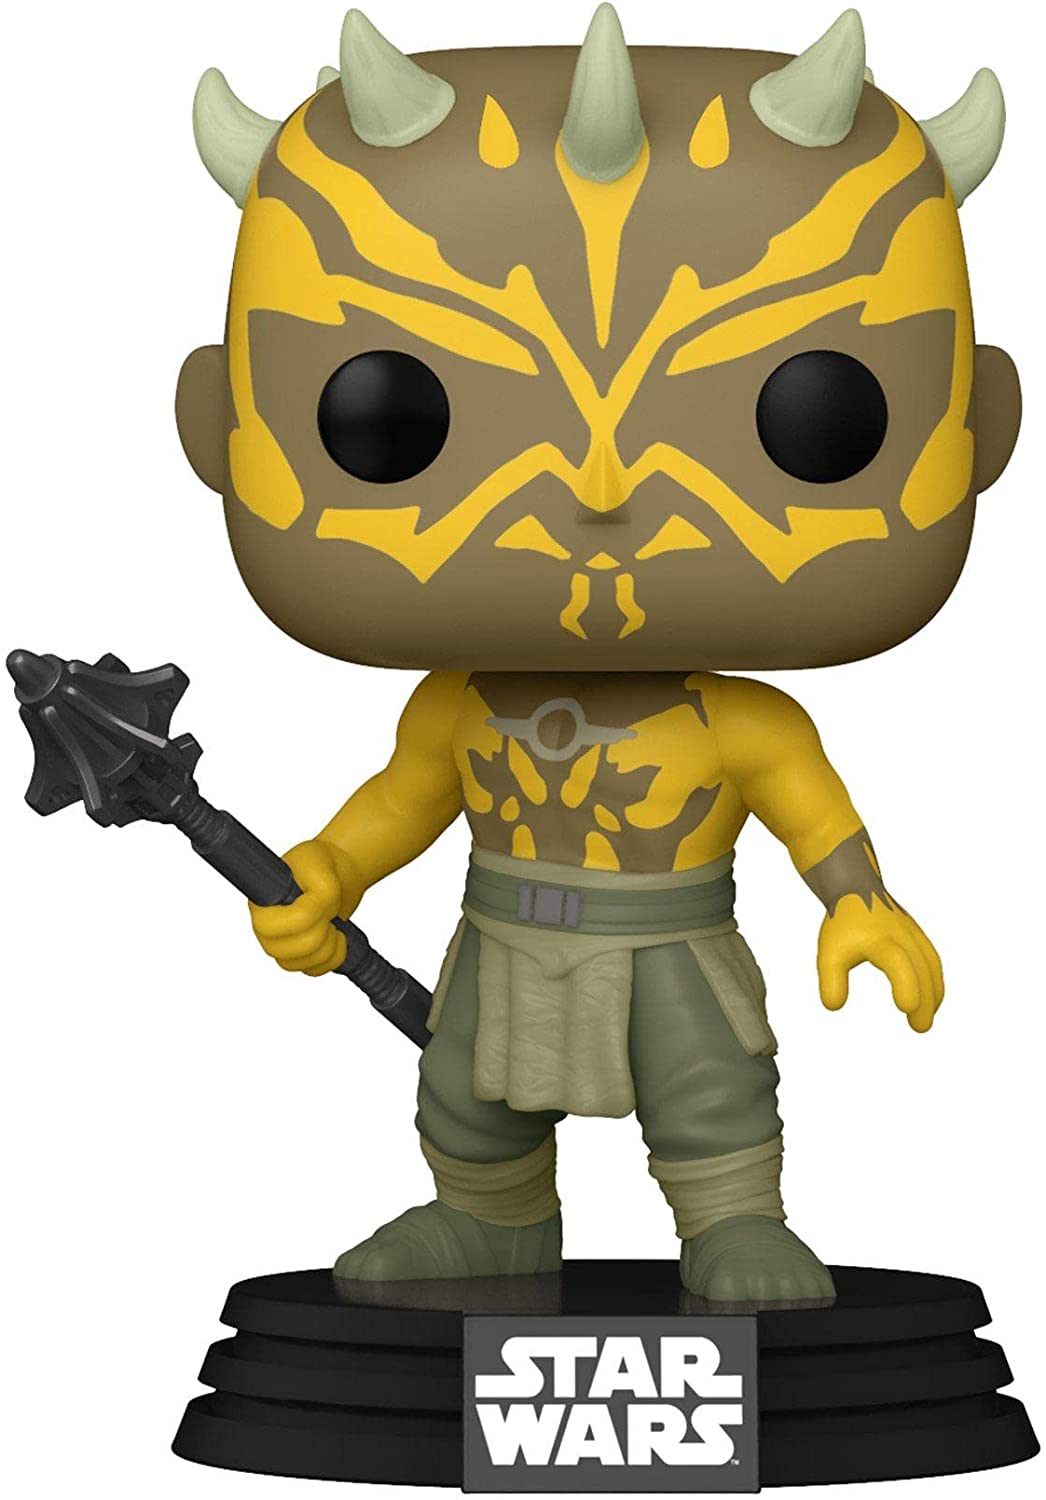 Product Image of Funko Pop! Star Wars: Jedi Fallen Order Nightbrother Pop! Vinyl - Excl. with Pop! Protector